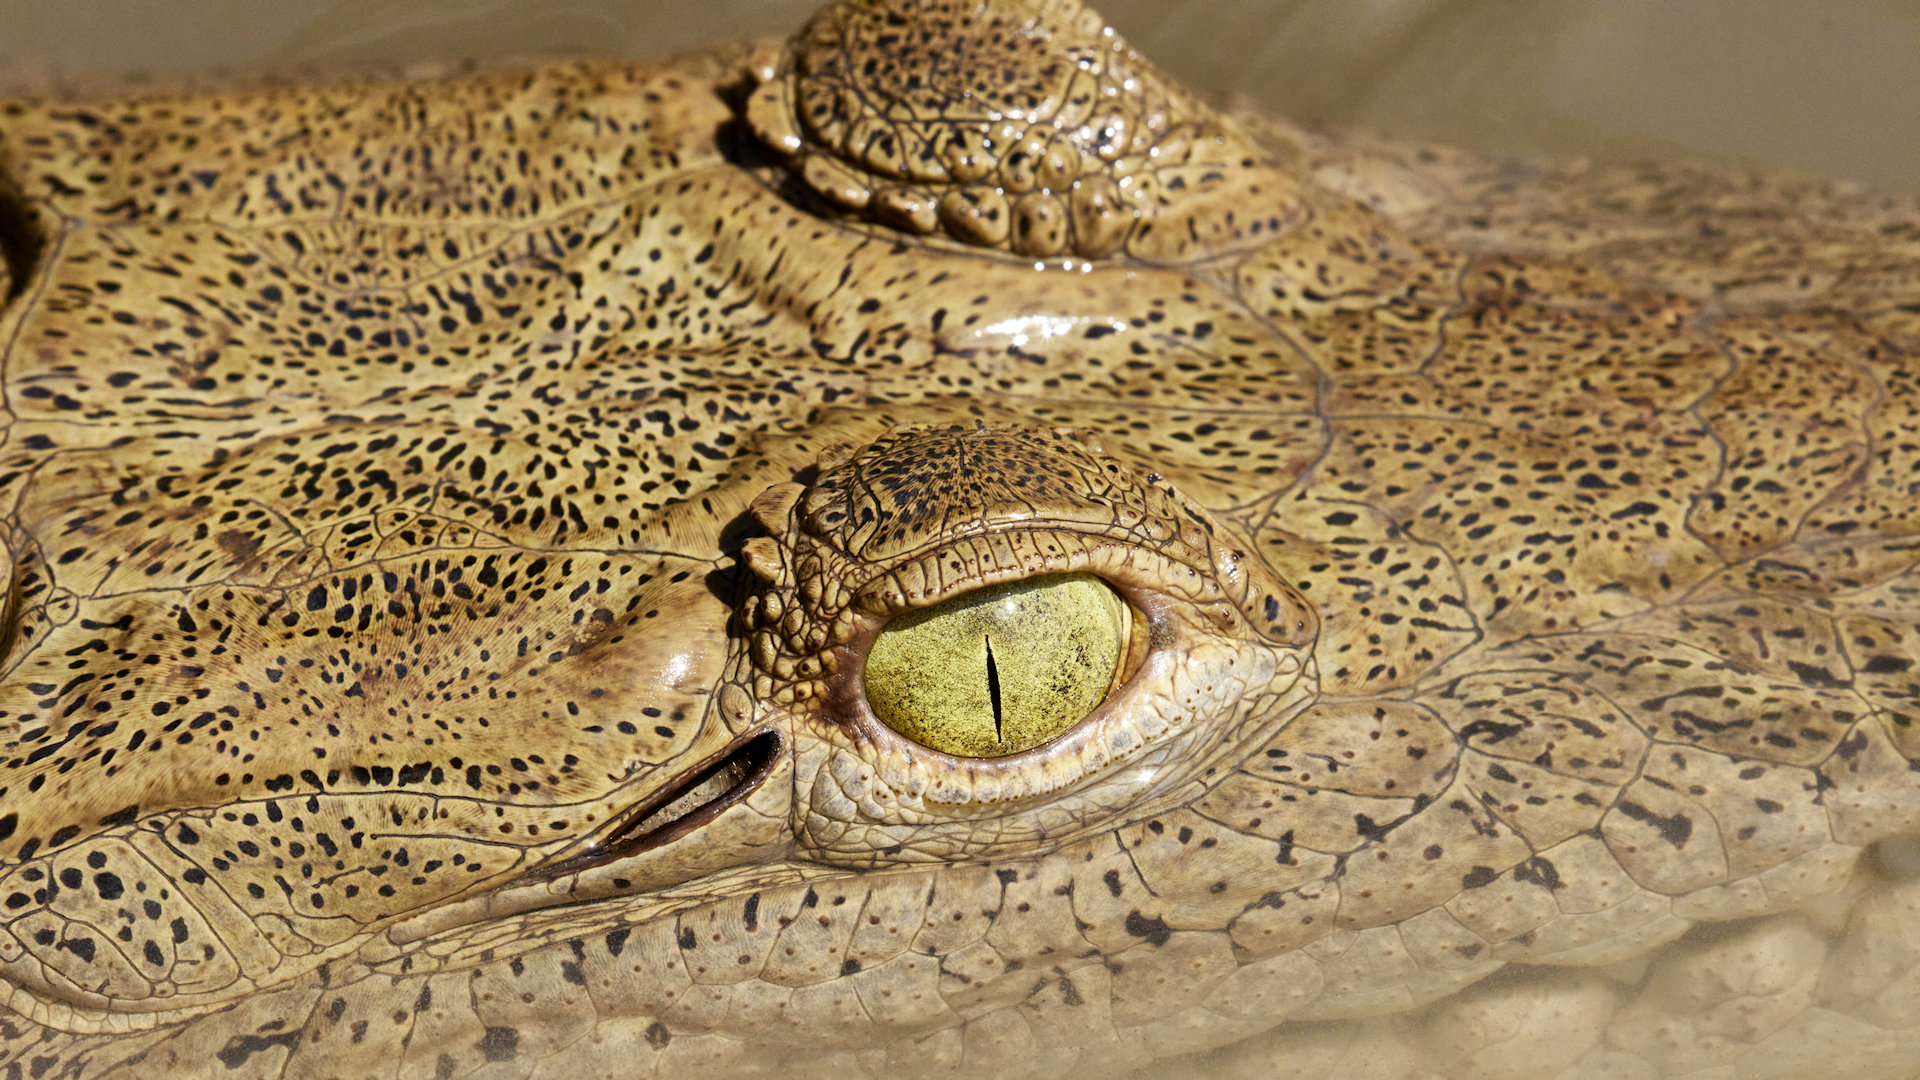 a cayman, about 2 metres long (or possibly a young American crocodile?) - image 1